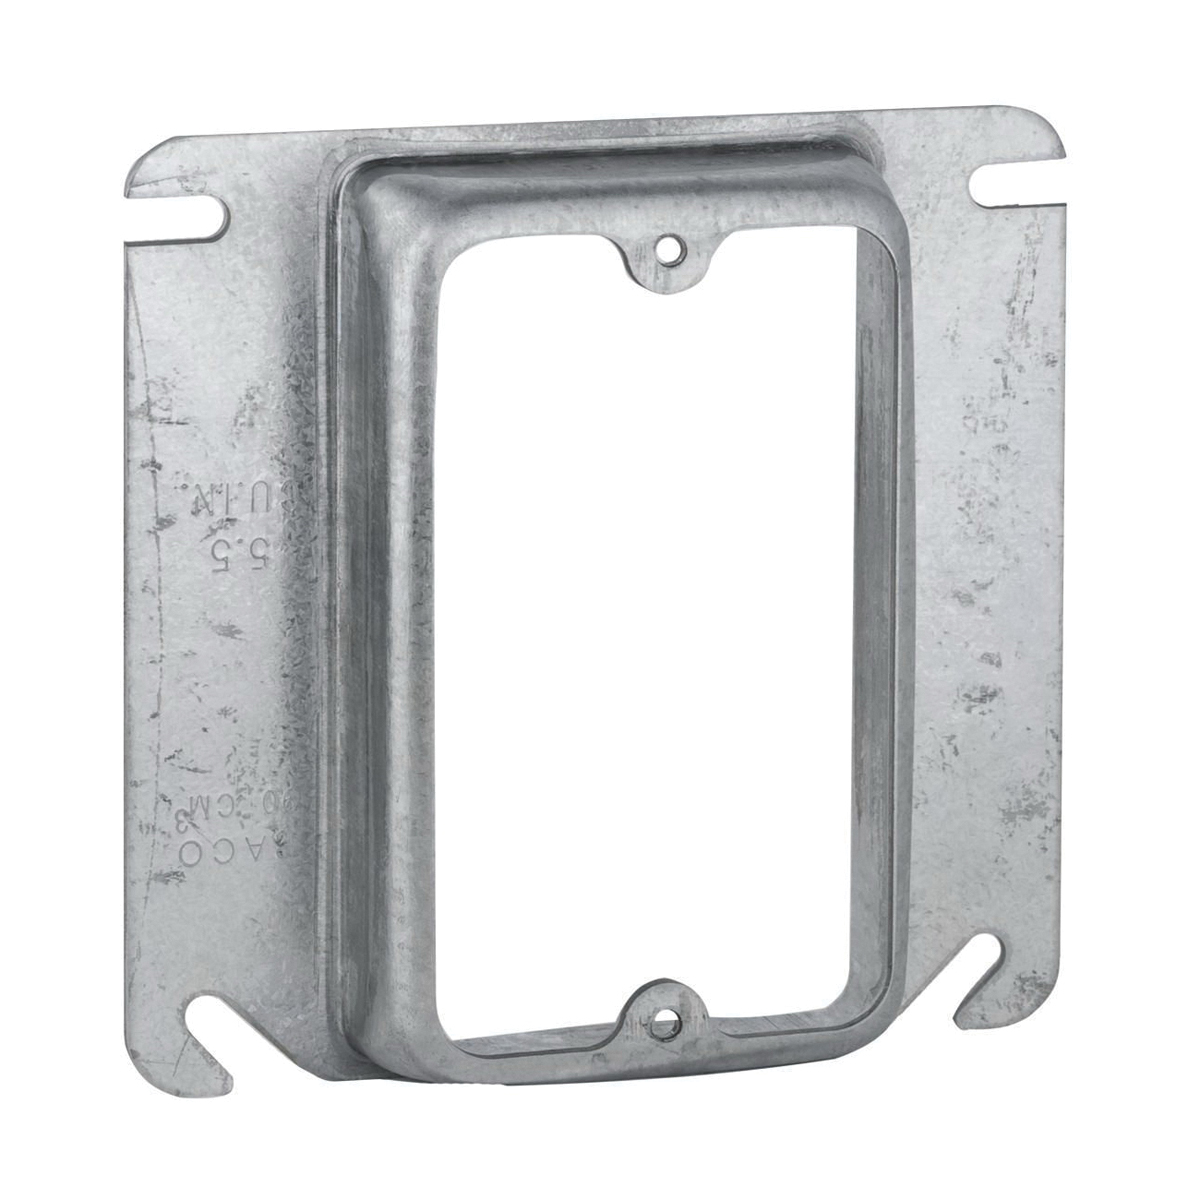 8773 Box Cover, 3/4 in L, 4 in W, Square, 1-Gang, Steel (Metal), Gray